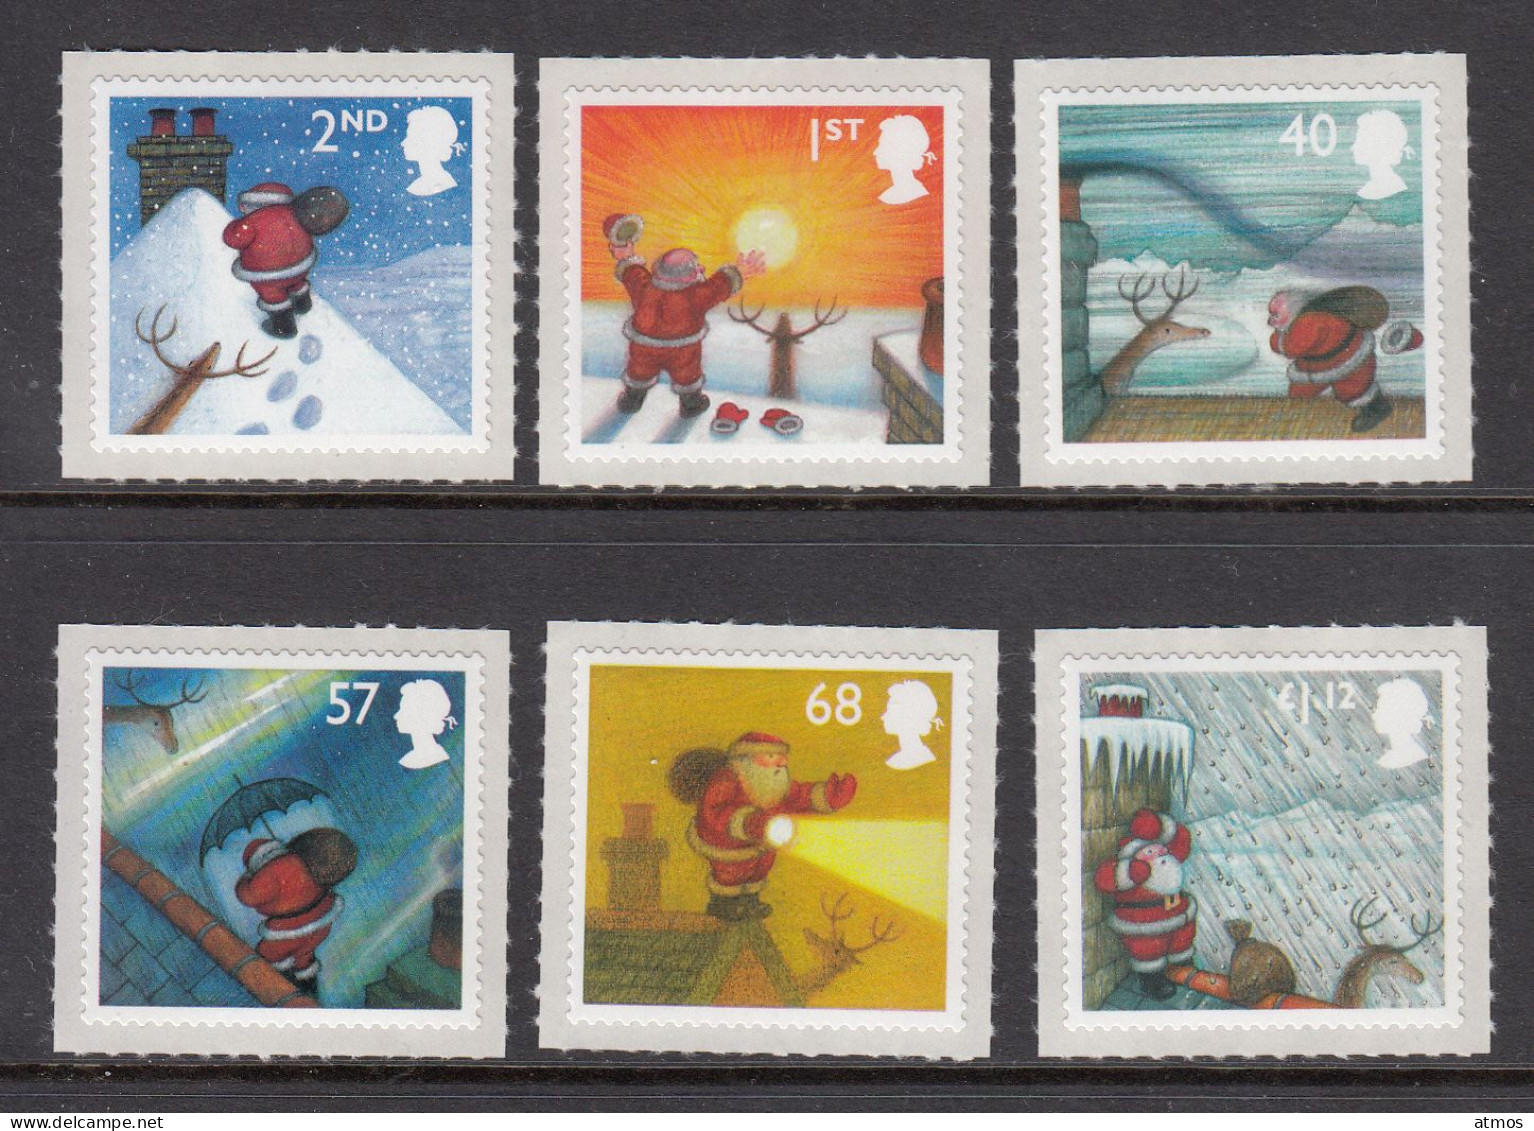 Great Britain MNH Michel Nr 2258 From 2004 - Neufs